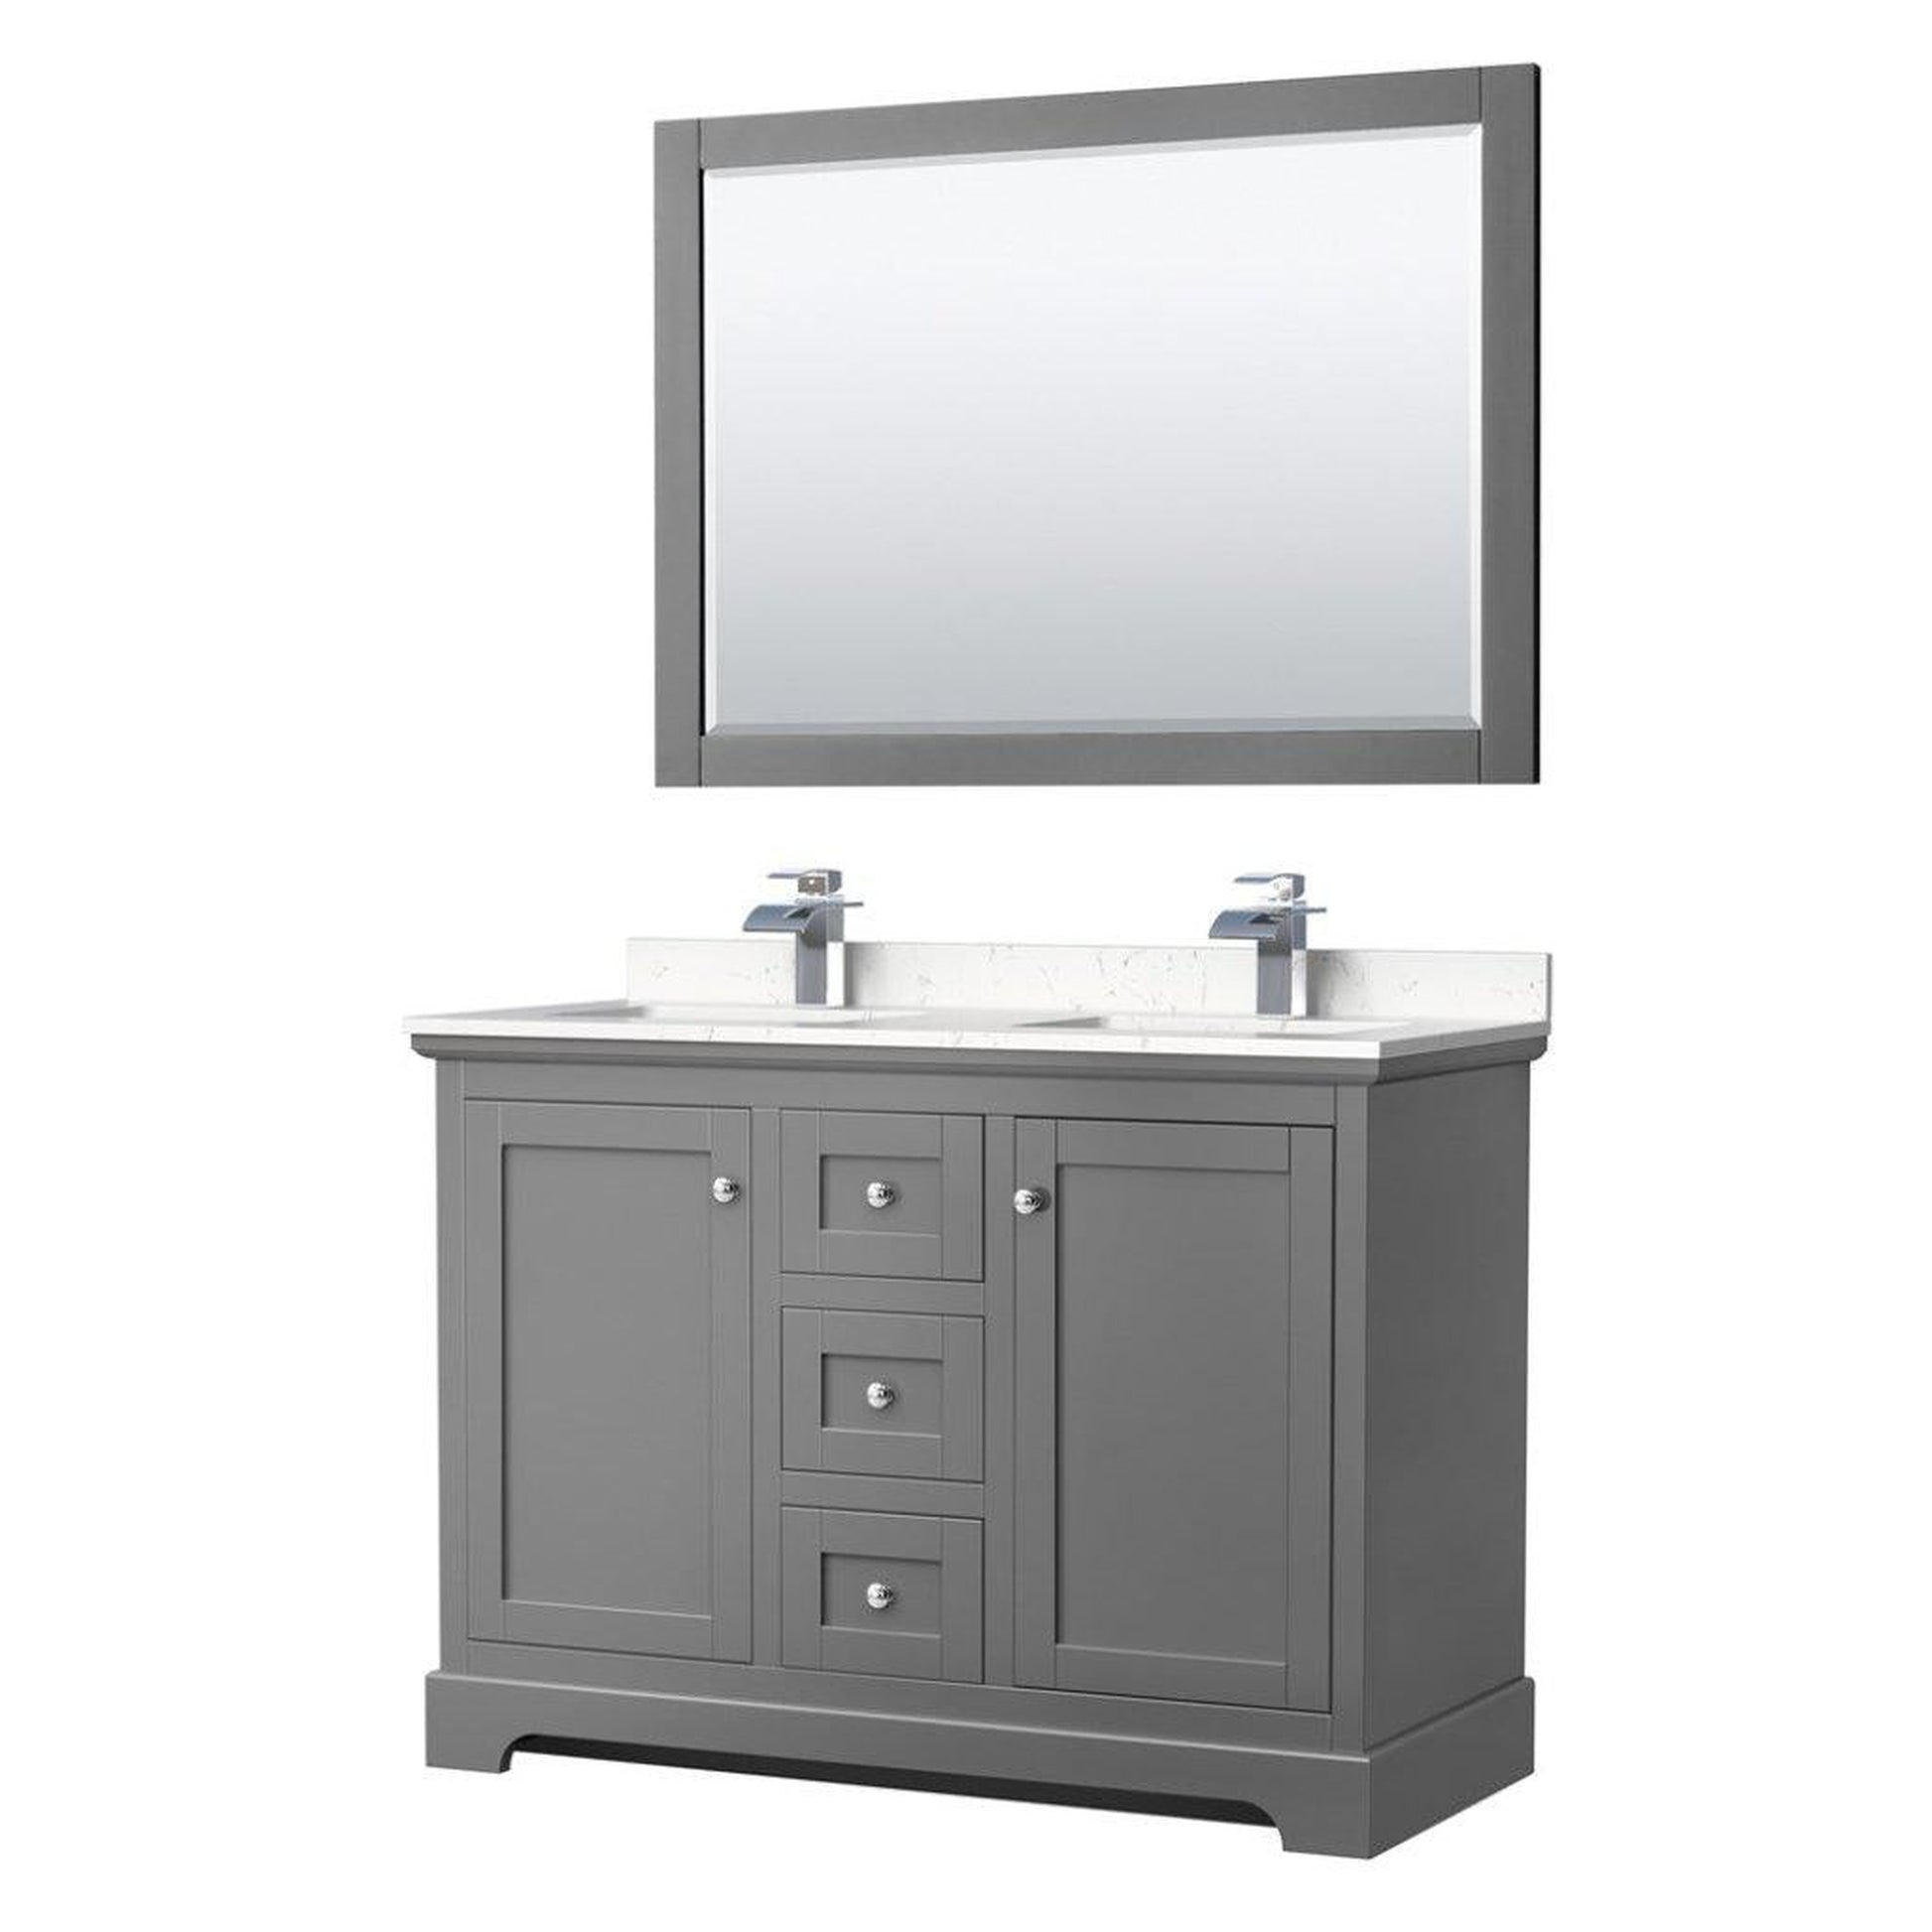 Wyndham Collection Avery 48" Dark Gray Double Bathroom Vanity Set With Light-Vein Cultured Marble Countertop With 1-Hole Faucet And Square Sink And 46" Mirror